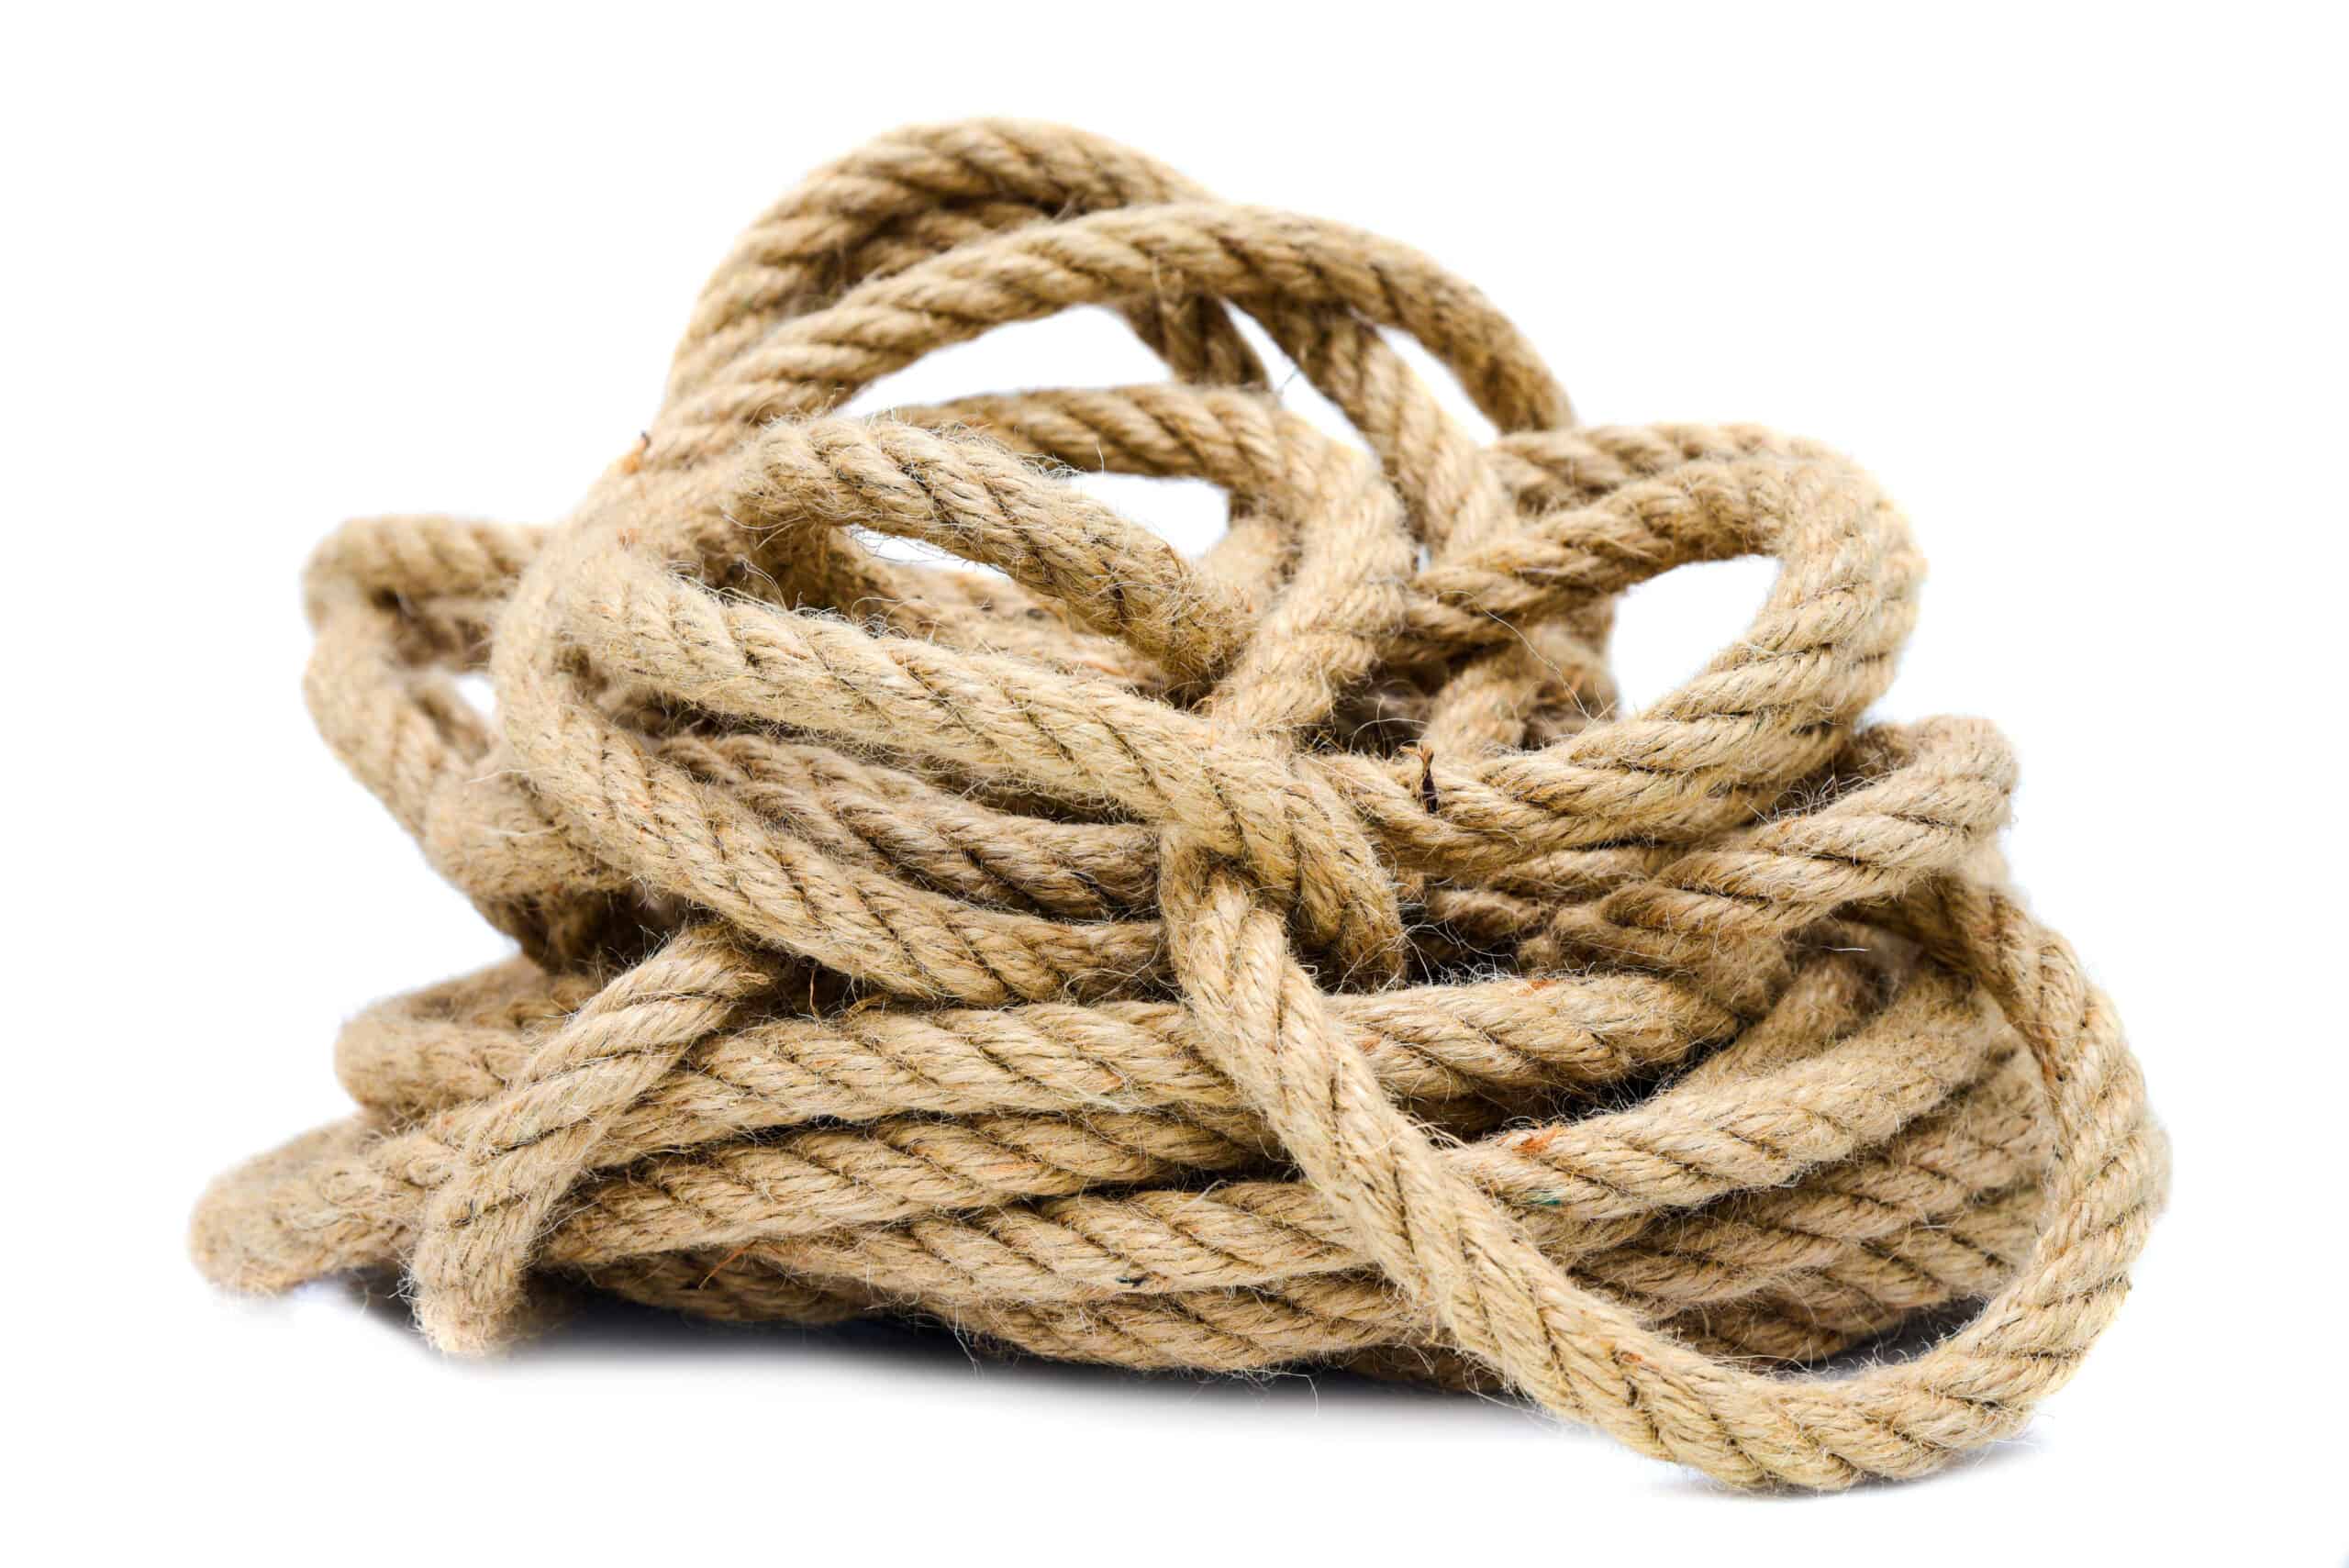 How Did Rope Walk Get its Name?